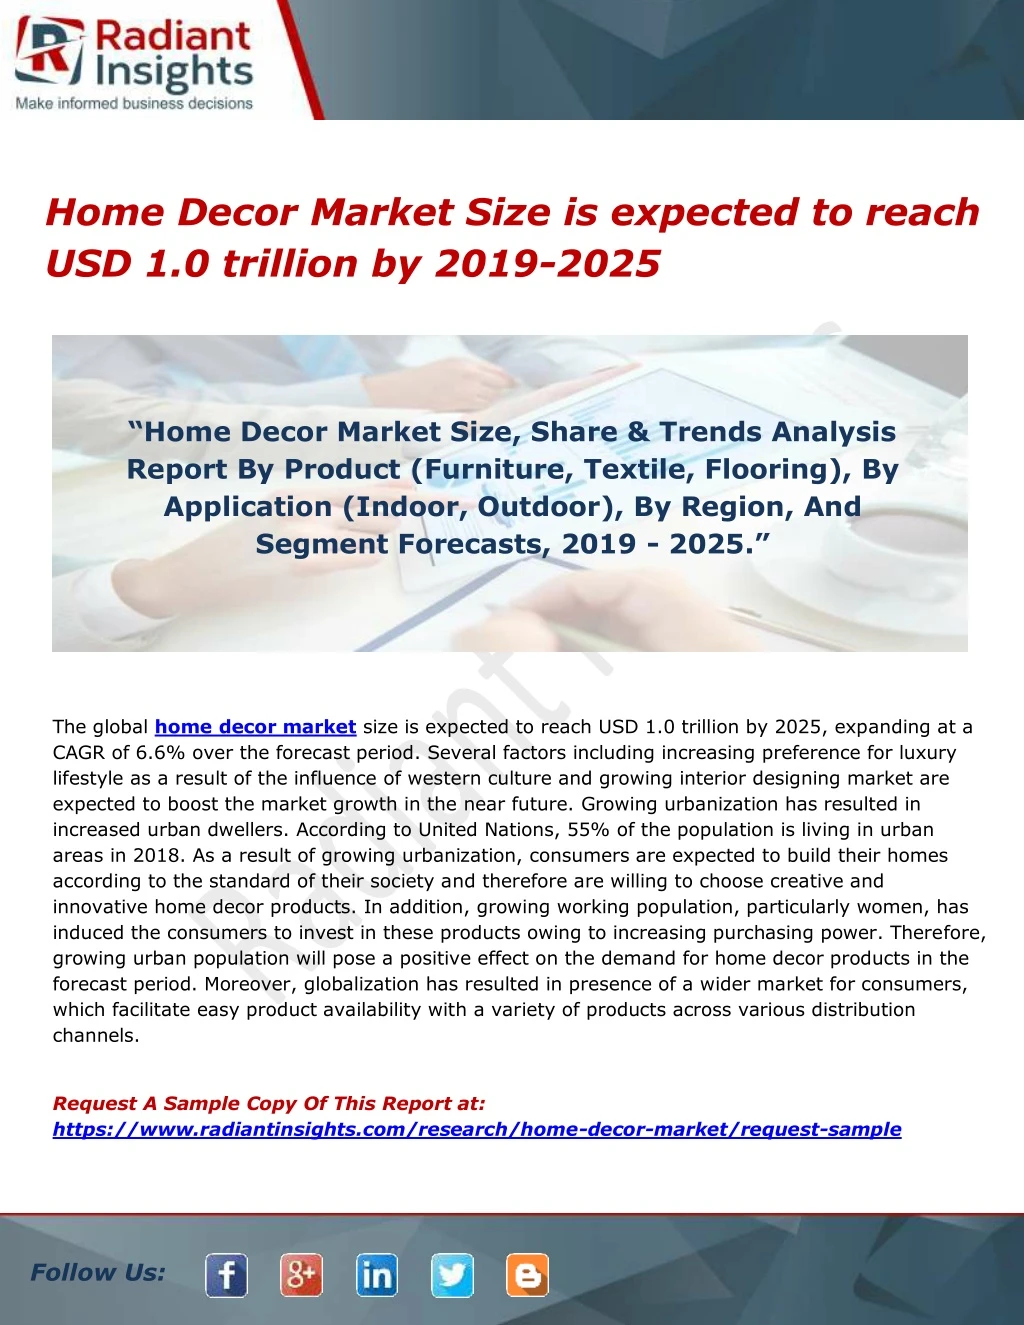 home decor market size is expected to reach